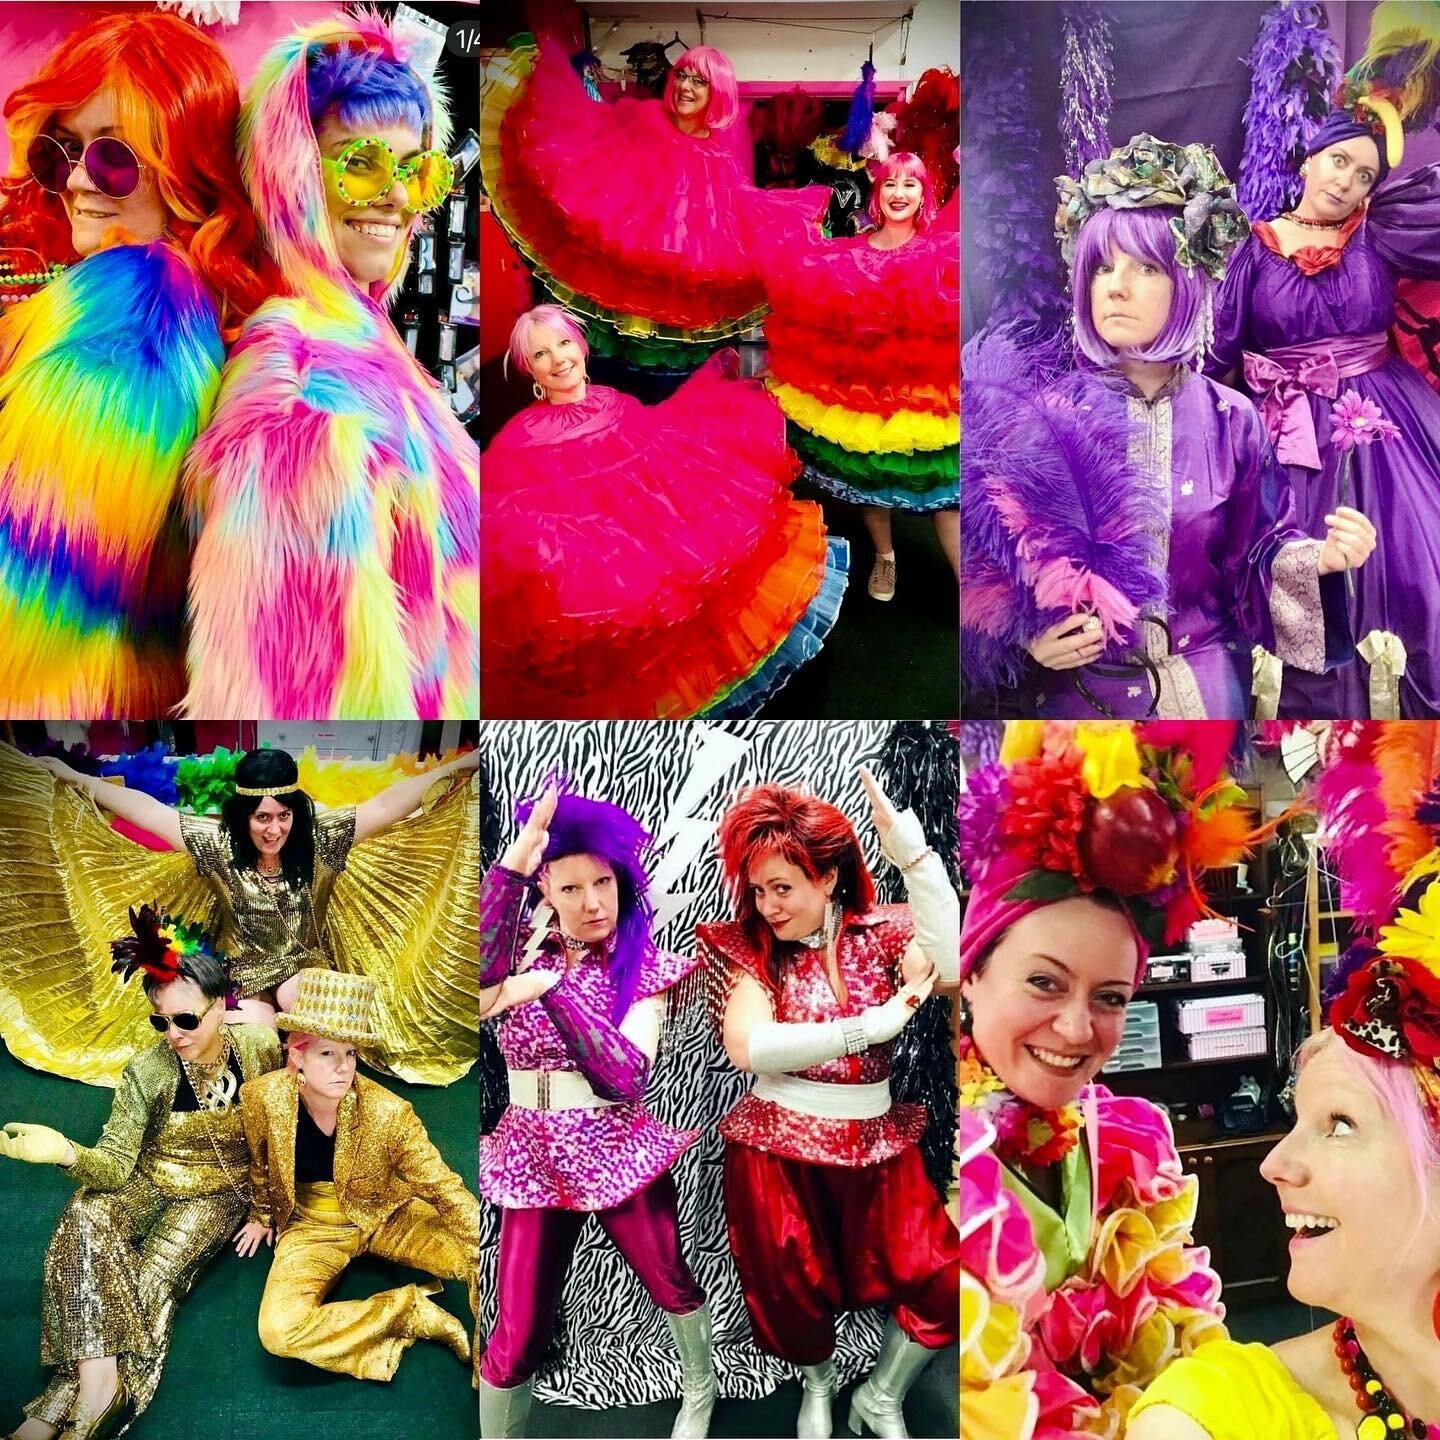 We&rsquo;ve been up to our eyeballs in sequins and feathers, plastic and leather! There&rsquo;s no time for photos- so here&rsquo;s some of our greatest hits from Mardi Gras past 🌈🌈❤️❤️ #sydneyworldpride2023 #mardigras2023 #lgbtq🌈 #rainbow #fancyd